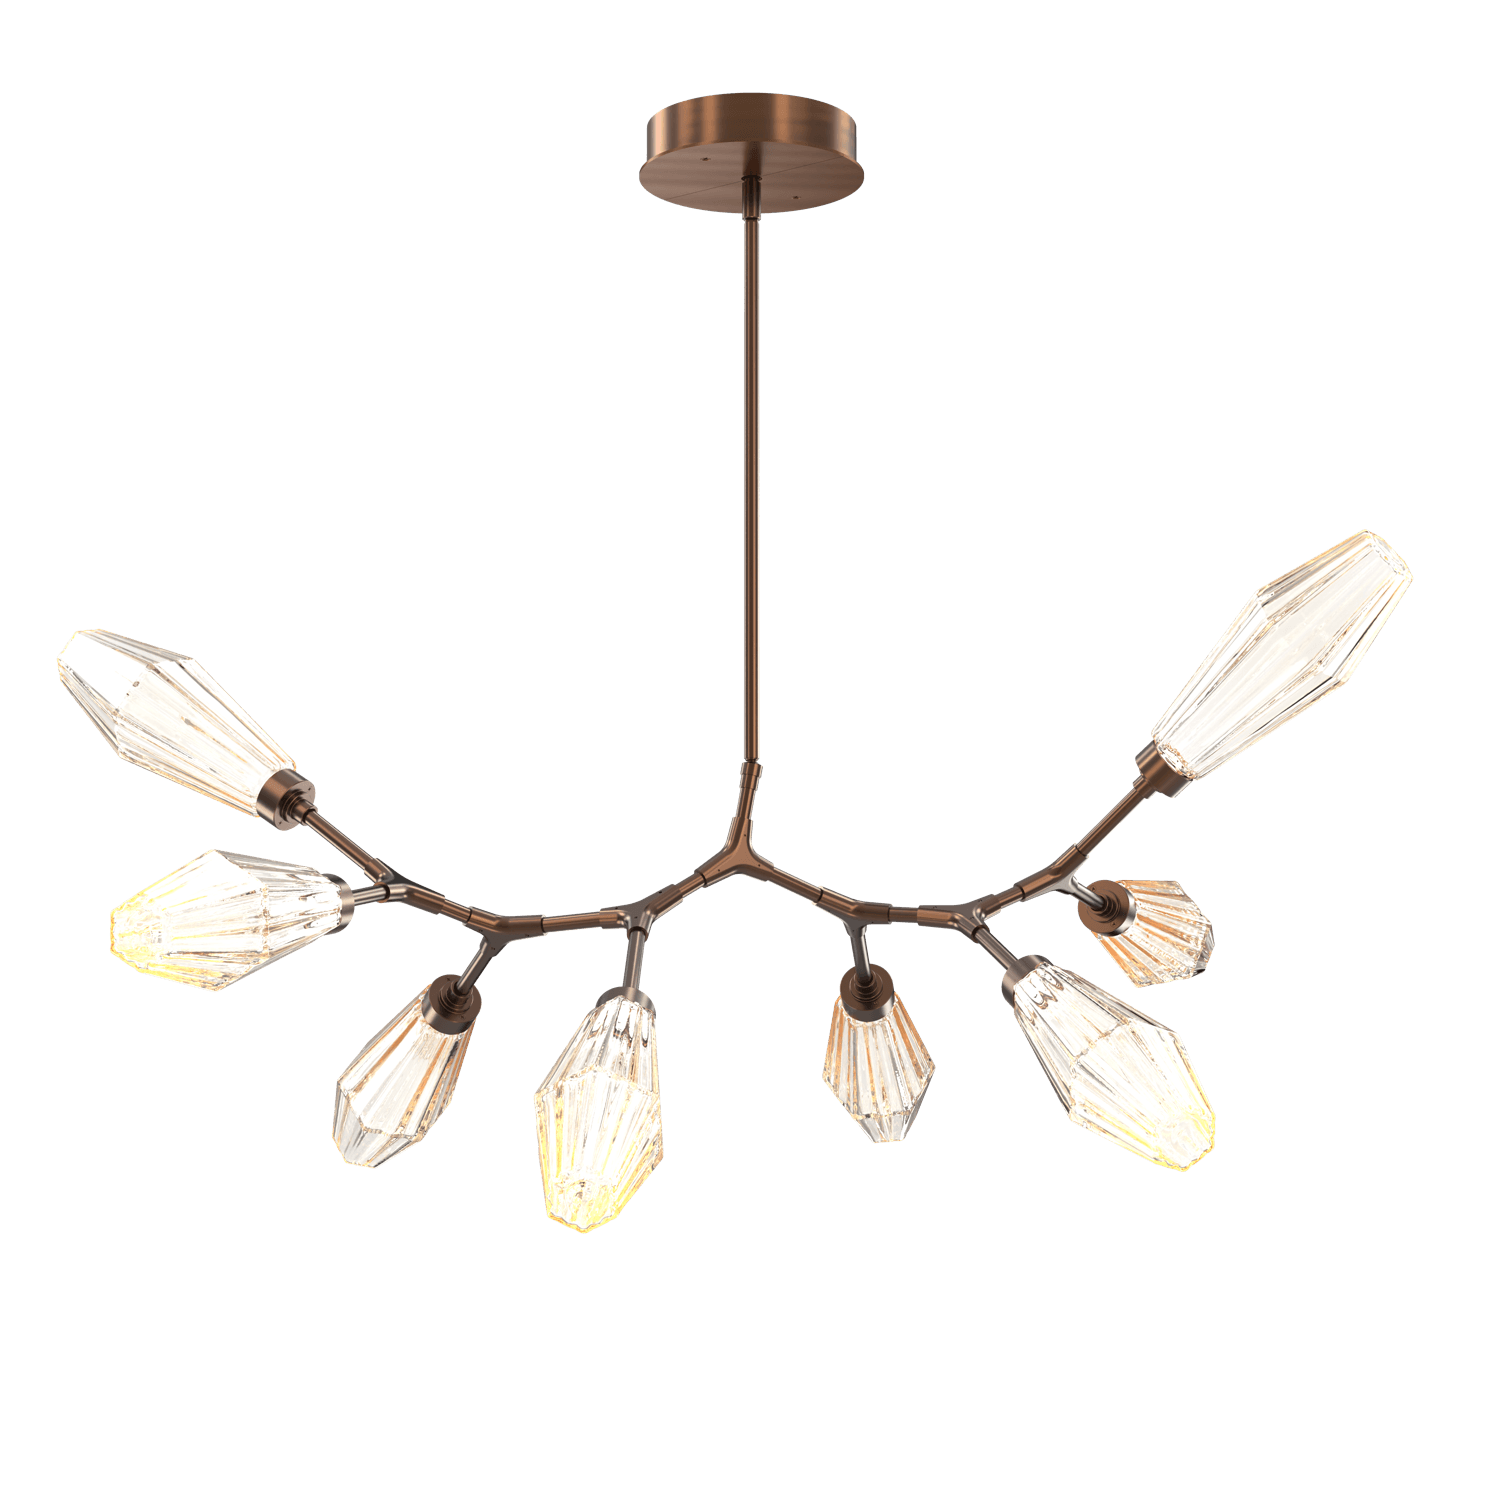 PLB0049-BB-RB-RA-Hammerton-Studio-Aalto-8-light-modern-branch-chandelier-with-oil-rubbed-bronze-finish-and-optic-ribbed-amber-glass-shades-and-LED-lamping